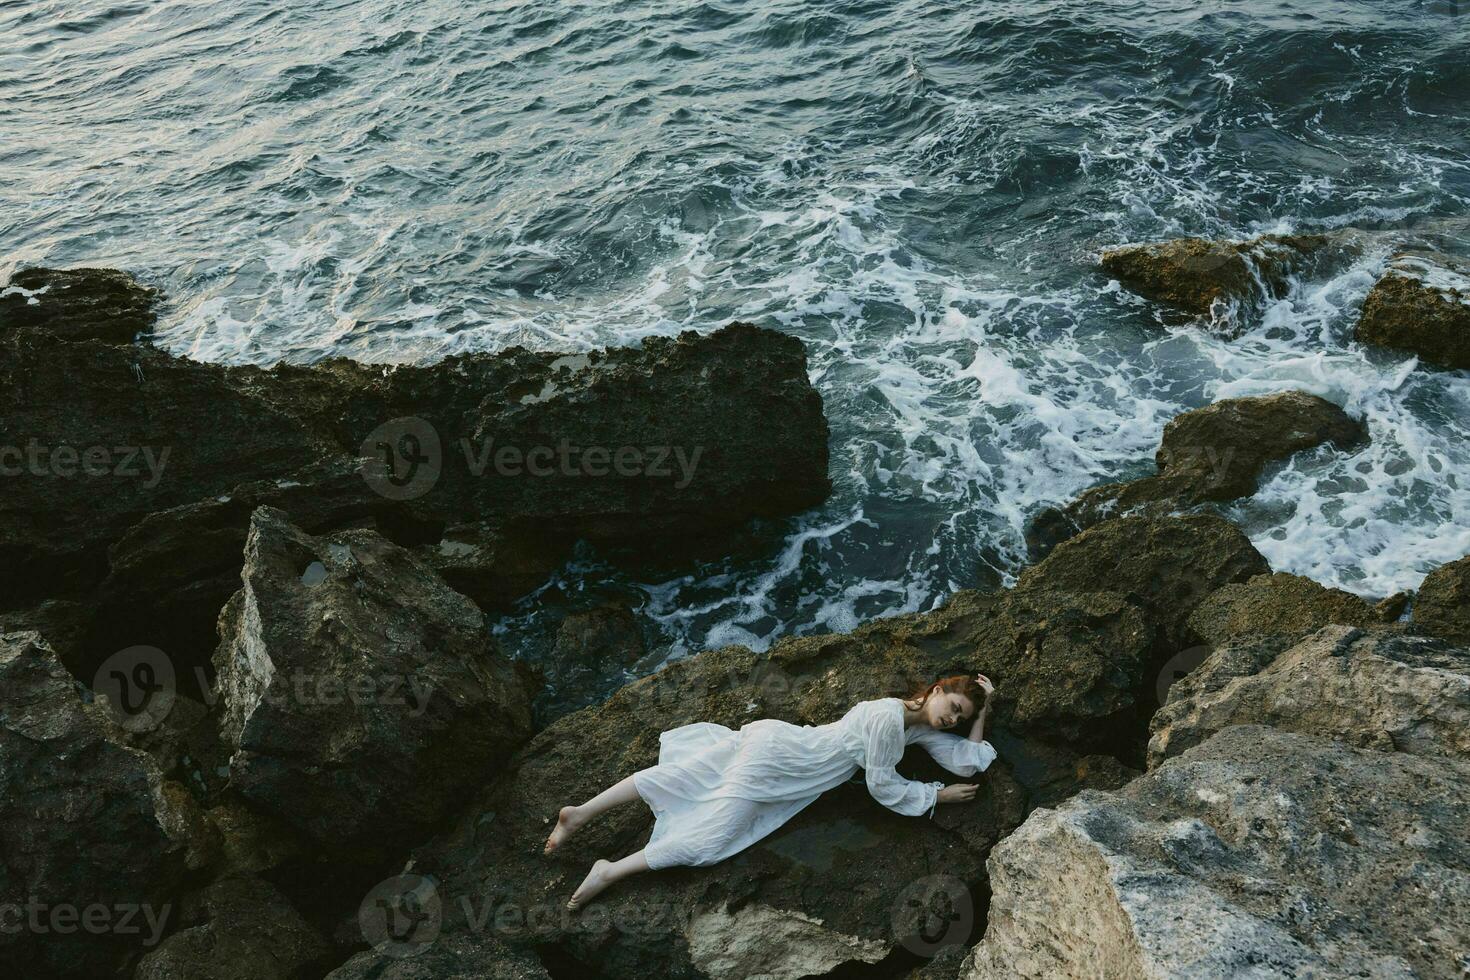 Barefoot woman in a secluded spot on a wild rocky coast in a white dress vacation concept photo